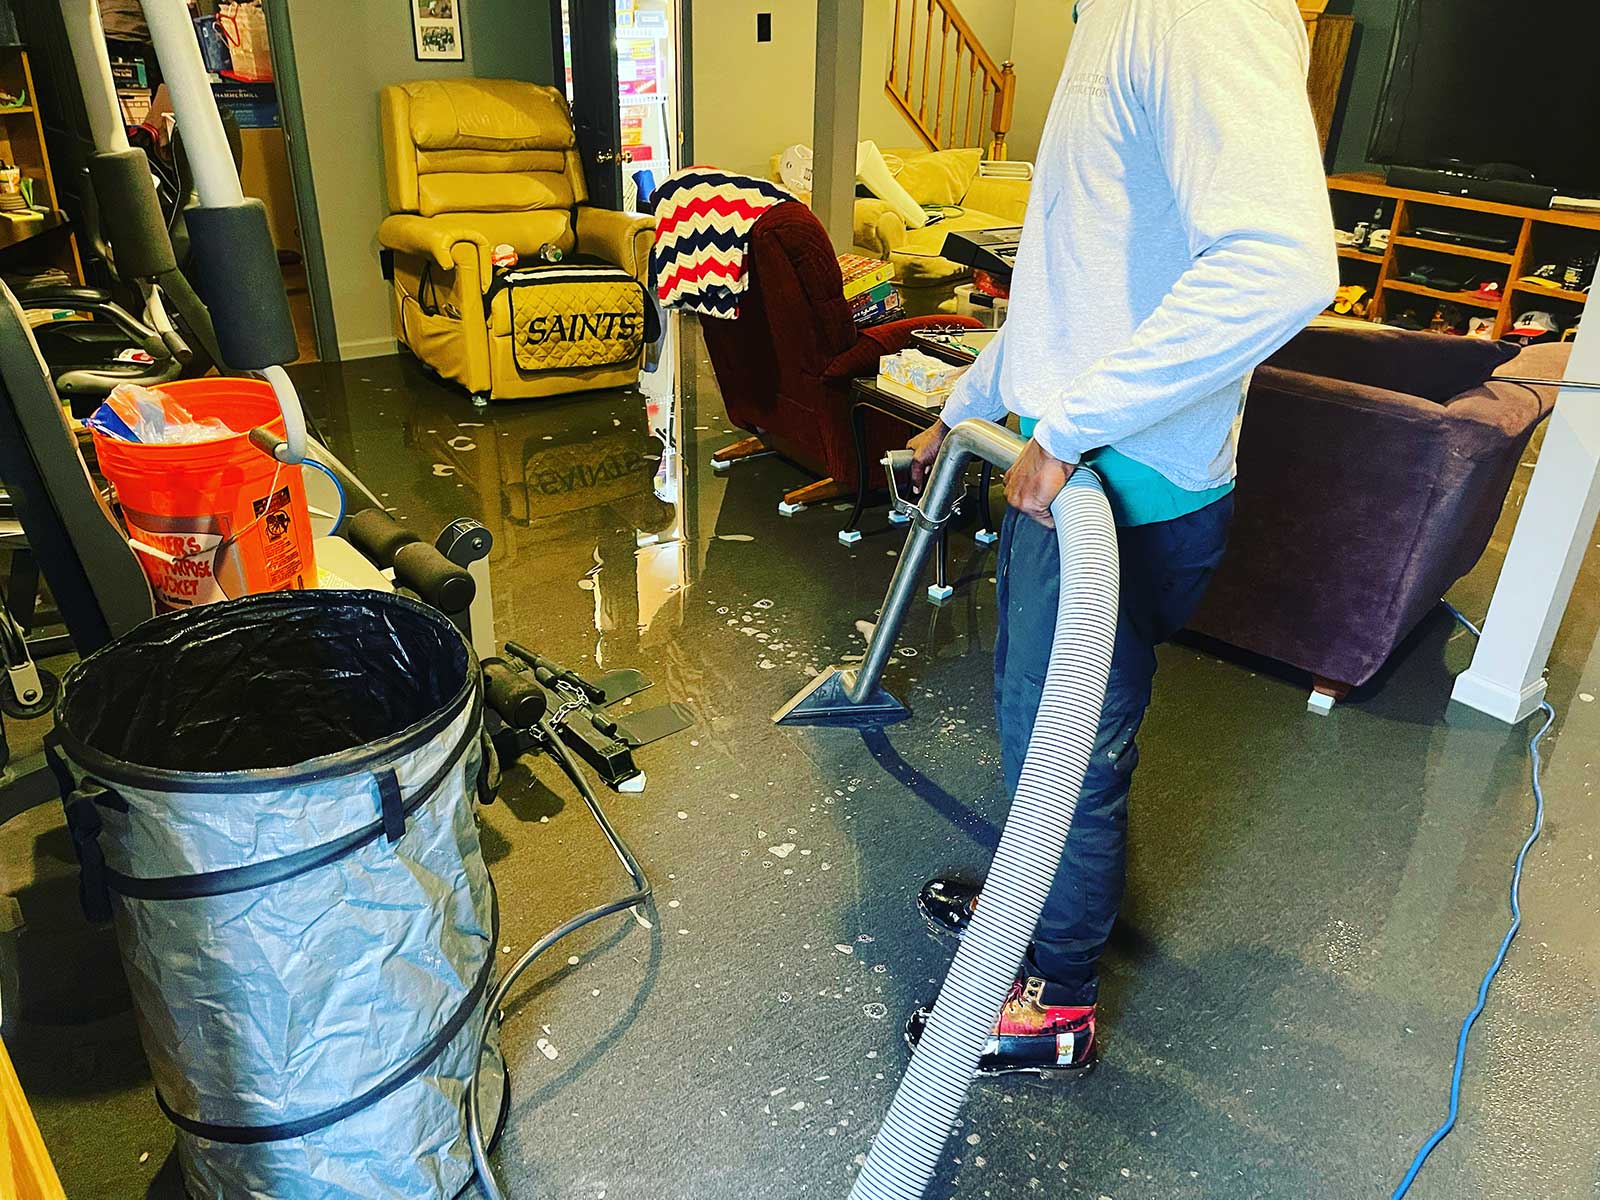 When it comes to water damage mitigation, response time is key. The longer water is allowed to remain in places it shouldn't be, the more damage can be done.